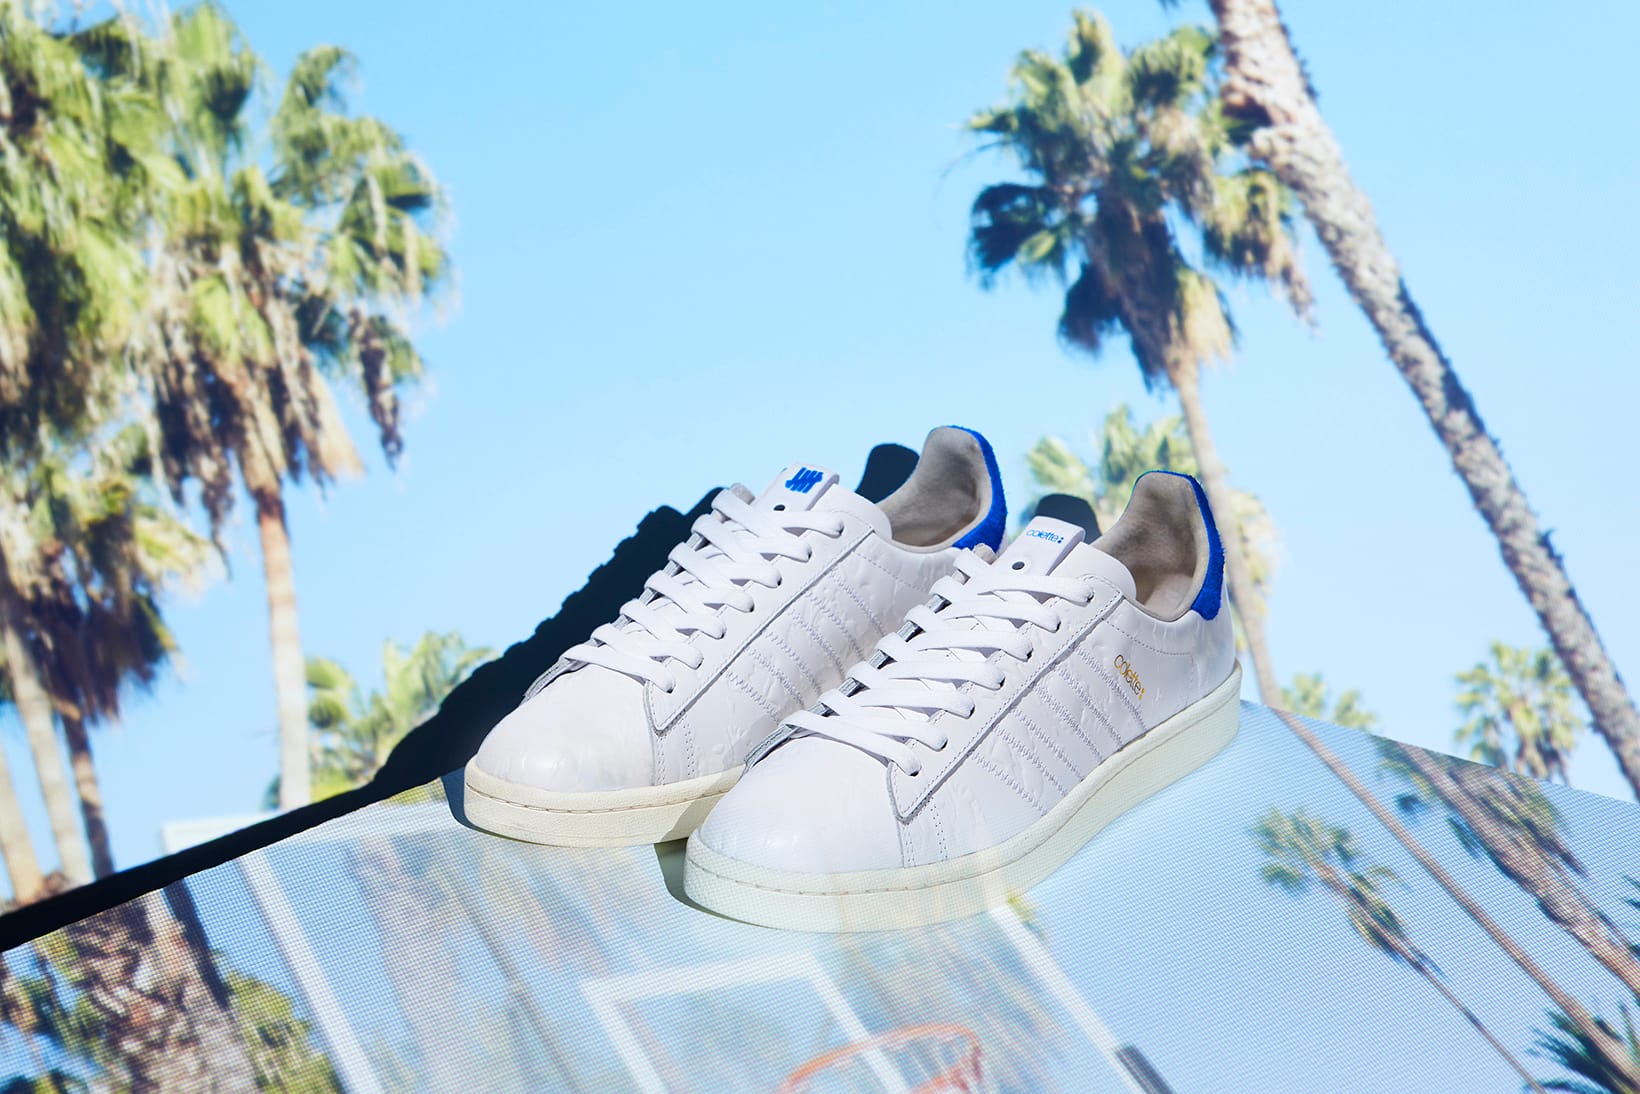 adidas campus 80 x colette x undefeated